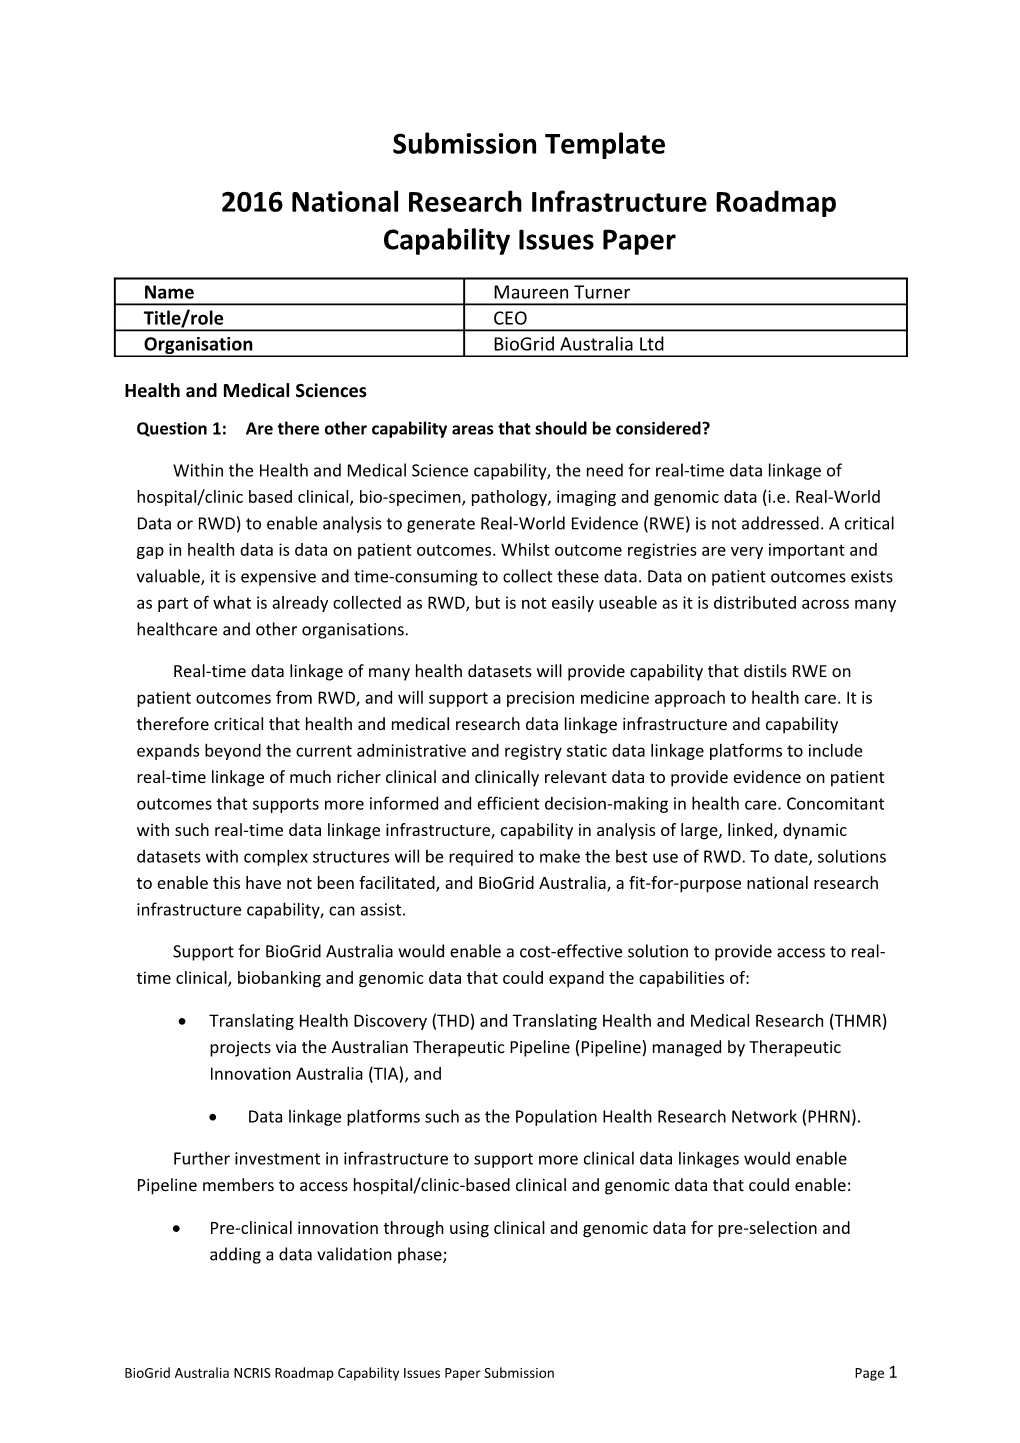 2016 National Research Infrastructure Roadmap Capability Issues Paper